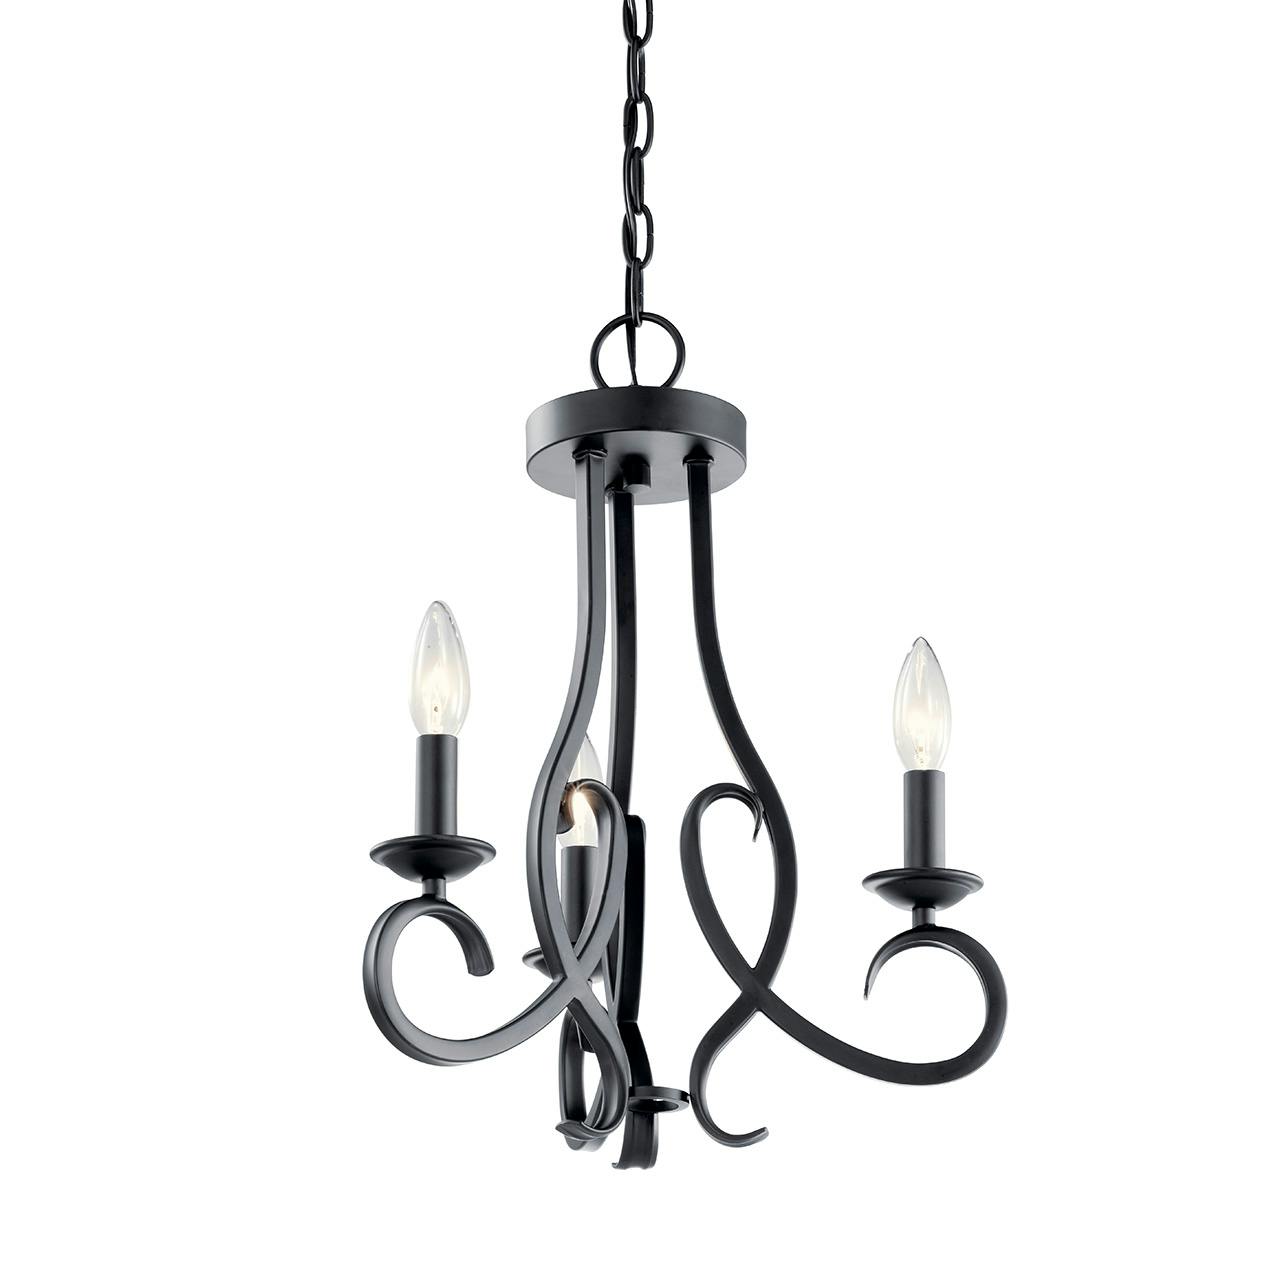 Ania 3 Light Convertible Chandelier Black without the canopy on a white background